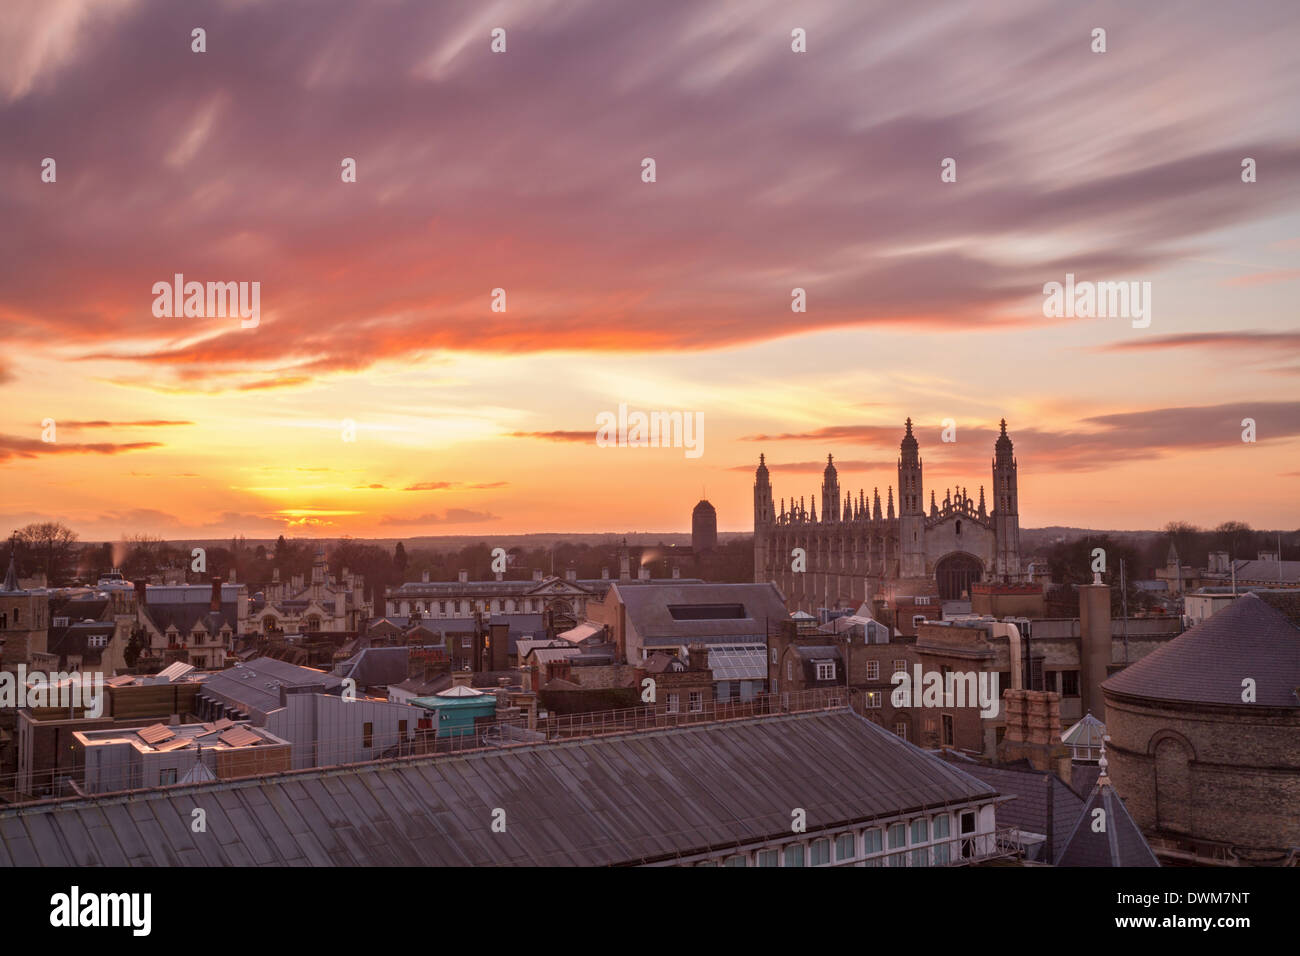 Cambridge City centre sunset over the rooftops in the town. Stock Photo